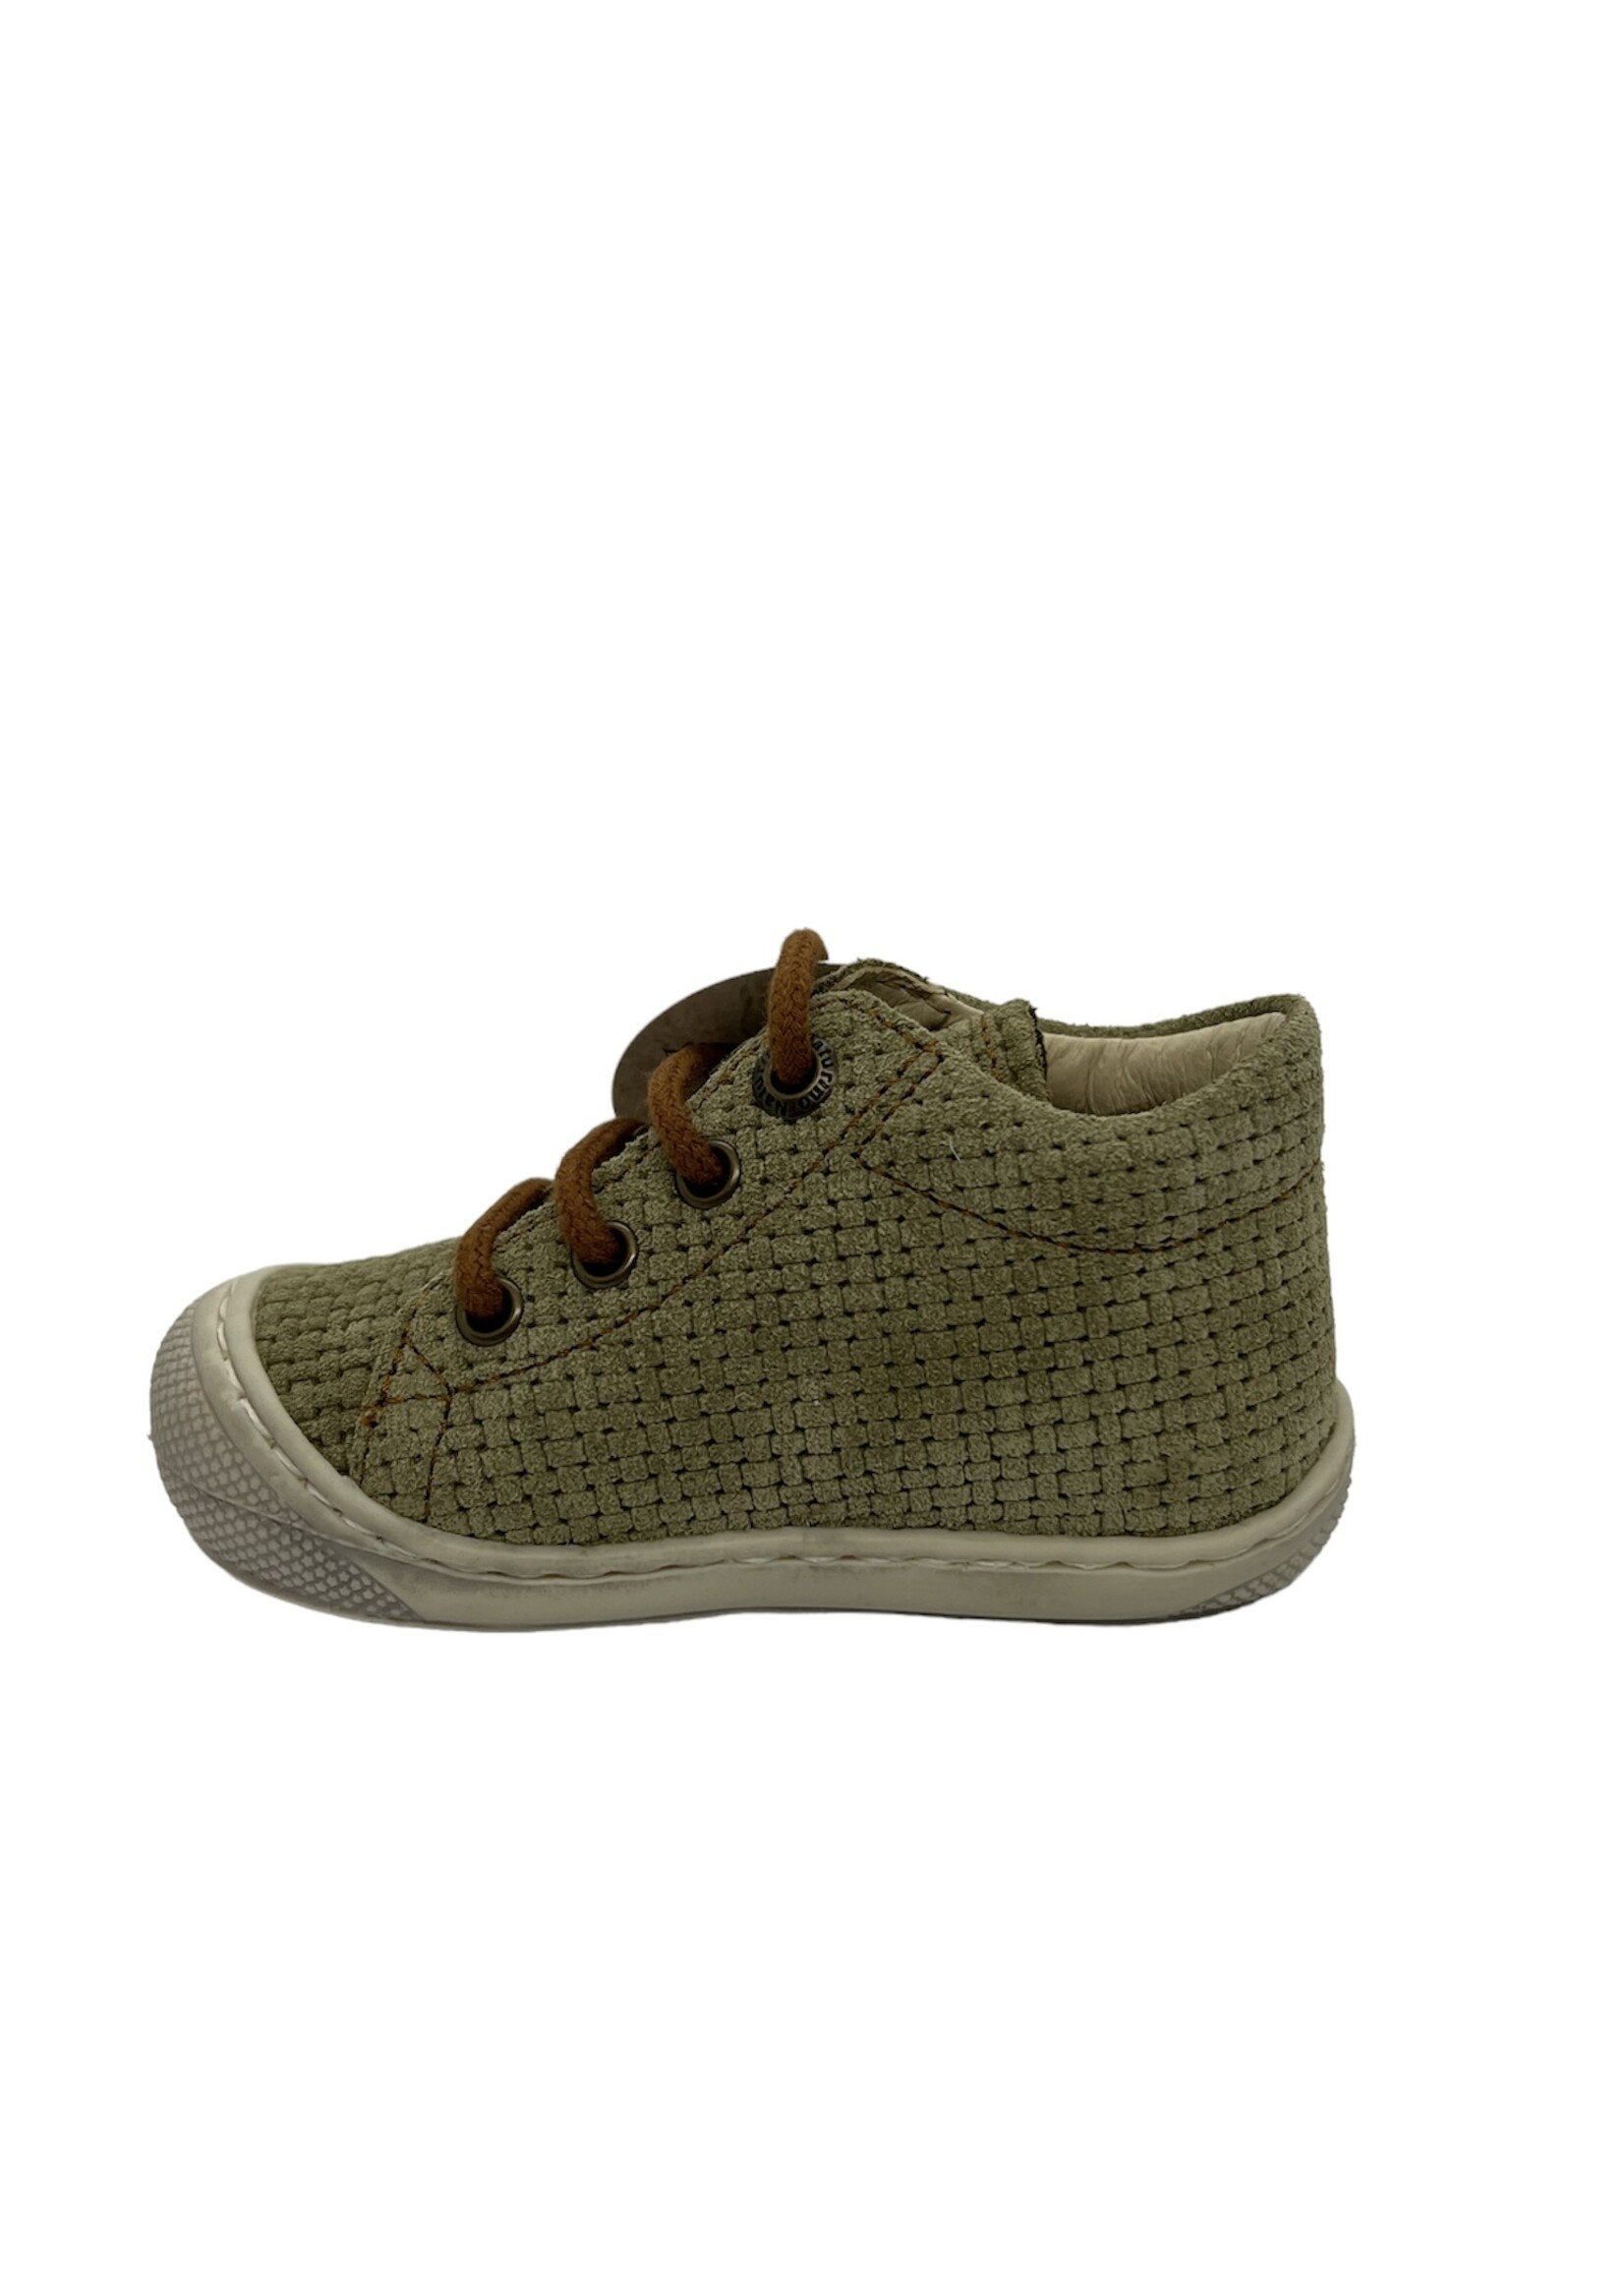 Naturino cocoon suede woven stone brown